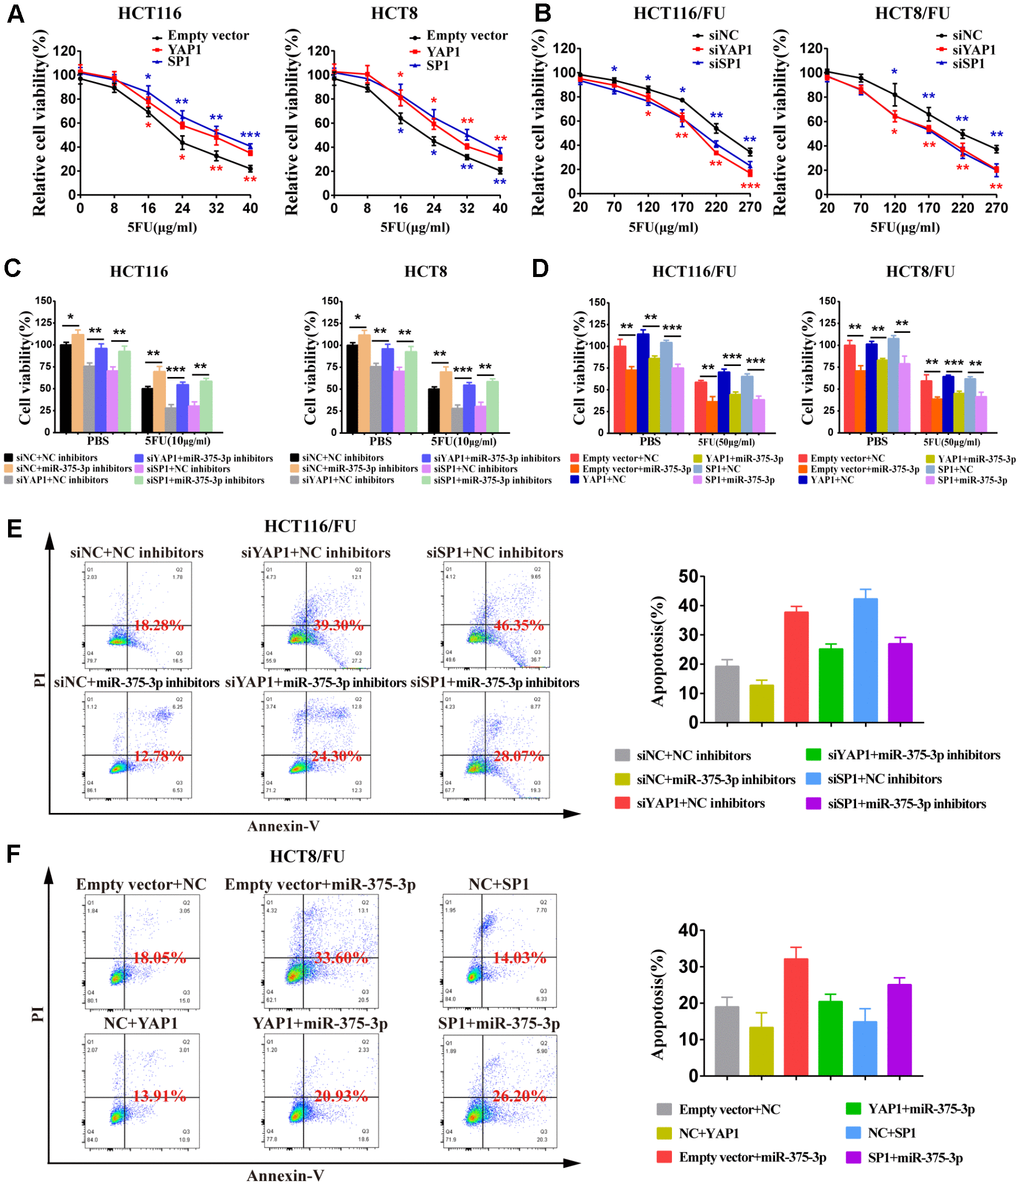 miR-375-3p suppresses cell proliferation and 5FU resistance of CRC cells by repressing YAP1 and SP1. (A) Overexpression of YAP1 and SP1increased cells resistance to 5FU in CRC parental cell lines, HCT116 and HCT8. (B) Depletion of YAP1 and SP1 reversed cells resistance to5FU in CRC resistant cell lines, HCT116/FU and HCT8/FU. (C, D) Cell viability assays were measured both in parental cell lines (HCT116, HCT8) and 5FU-resistant cell lines (HCT116/FU, HCT8/FU). HCT116 and HCT8 cells co-transfected with miR-375-3p inhibitors and siYAP1 or siSP1 respectively, were treated with 5FU (10μg/ml) or not (PBS). HCT116/FU and HCT8/FU cells co-transfected with miR-375-3p and YAP1 or SP1 overexpressing plasmids respectively, were treated with 5FU (50μg/ml) or not (PBS). (E, F) The apoptosis rates of HCT116/FU cells with co-transfection of miR-375-3p inhibitors and siYAP1 or siSP1, respectively, and HCT8/FU cells with co-transfection of miR-375-3p and YAP1 or SP1 overexpressing plasmids, respectively, were measured by flow cytometry analysis. Every system treated with low dose of 5FU for 50μg/ml. *P P P 